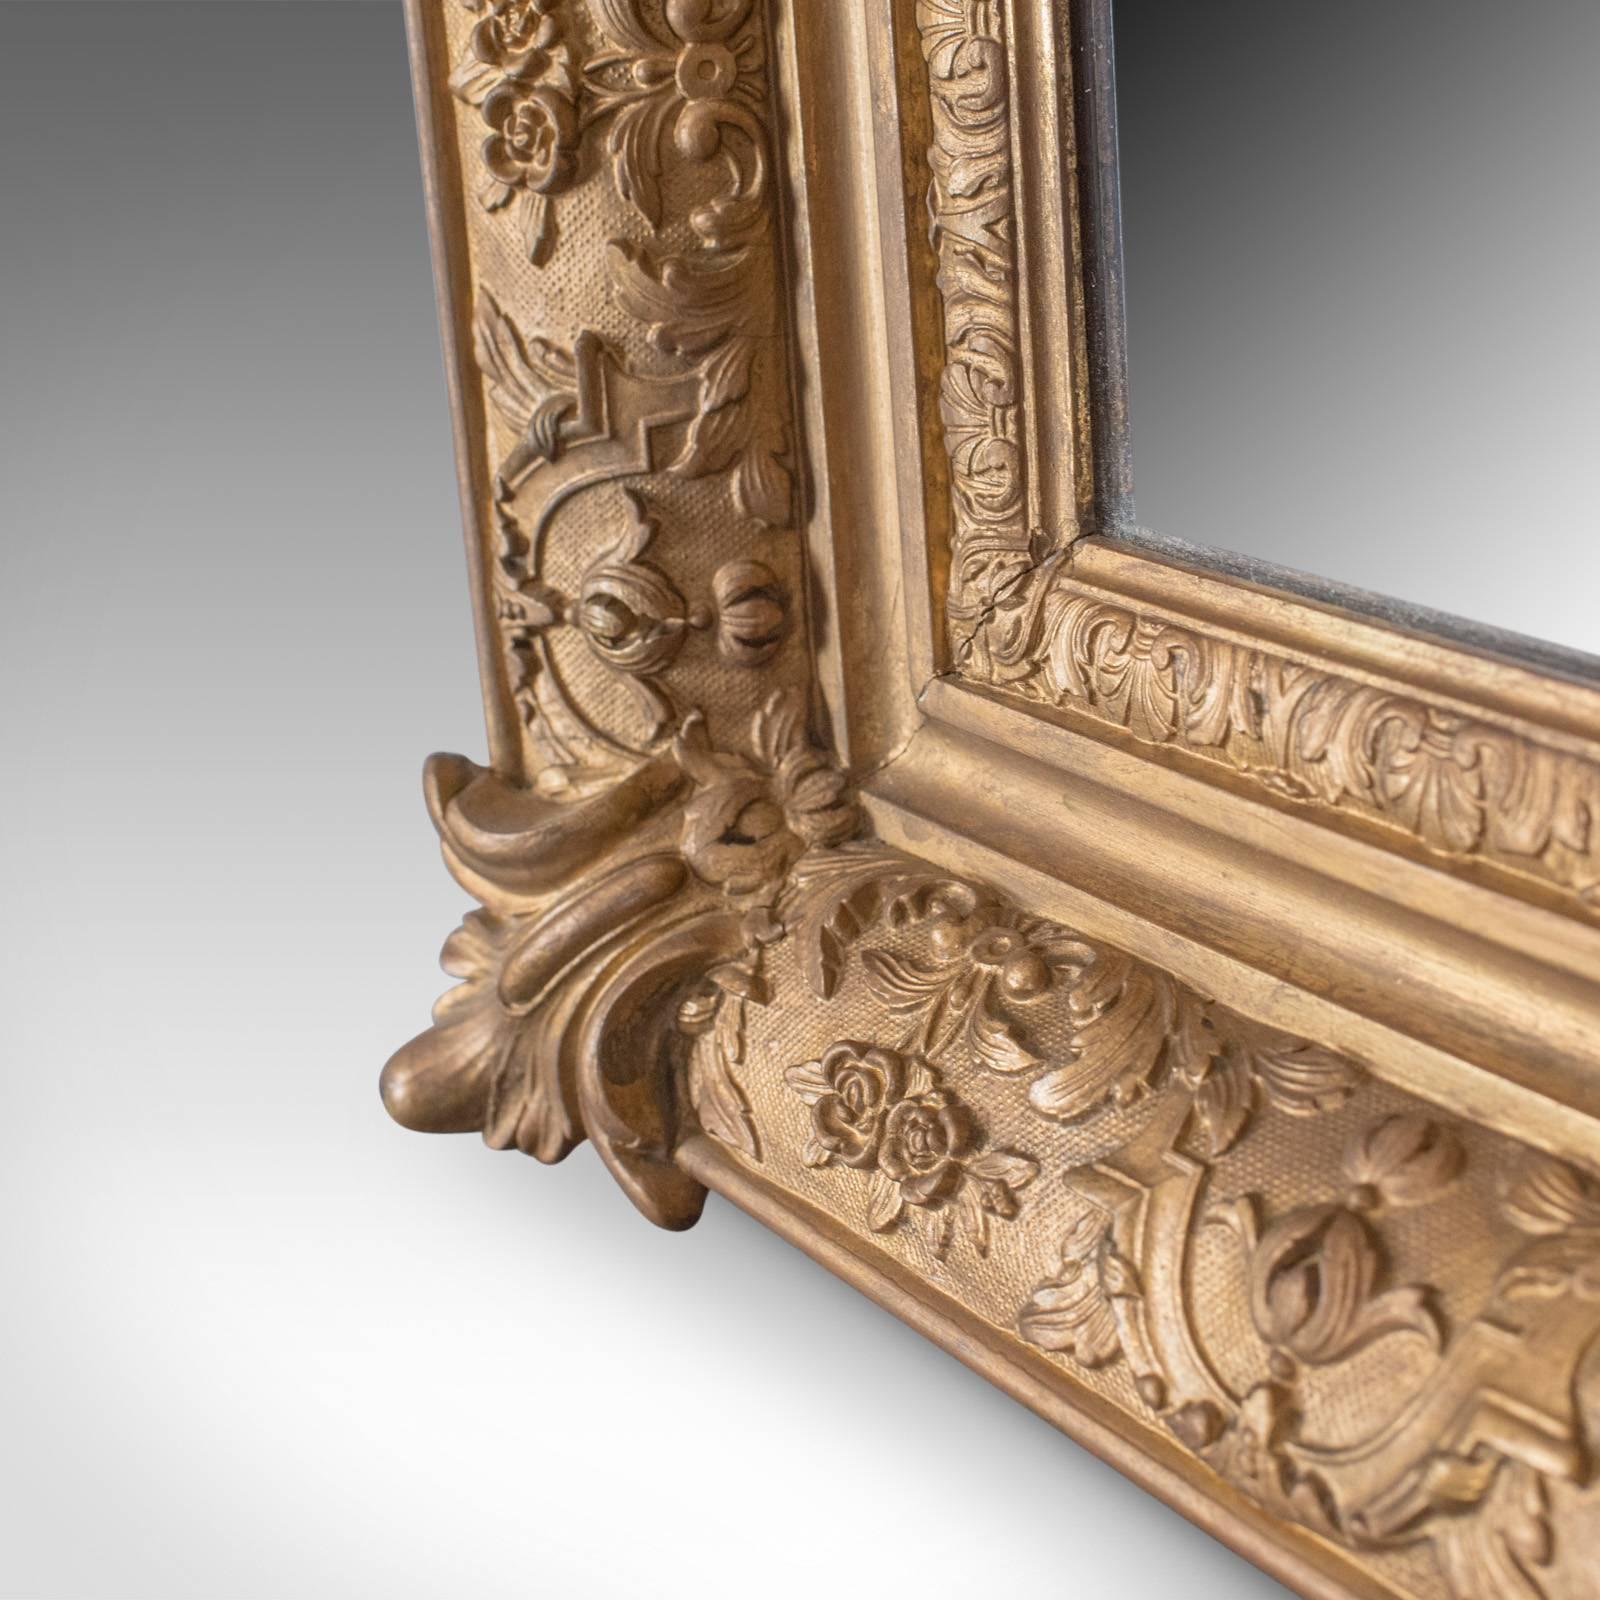 19th Century Large Antique Wall Mirror, Victorian, Gilt Gesso Frame, Overmantel, circa 1880